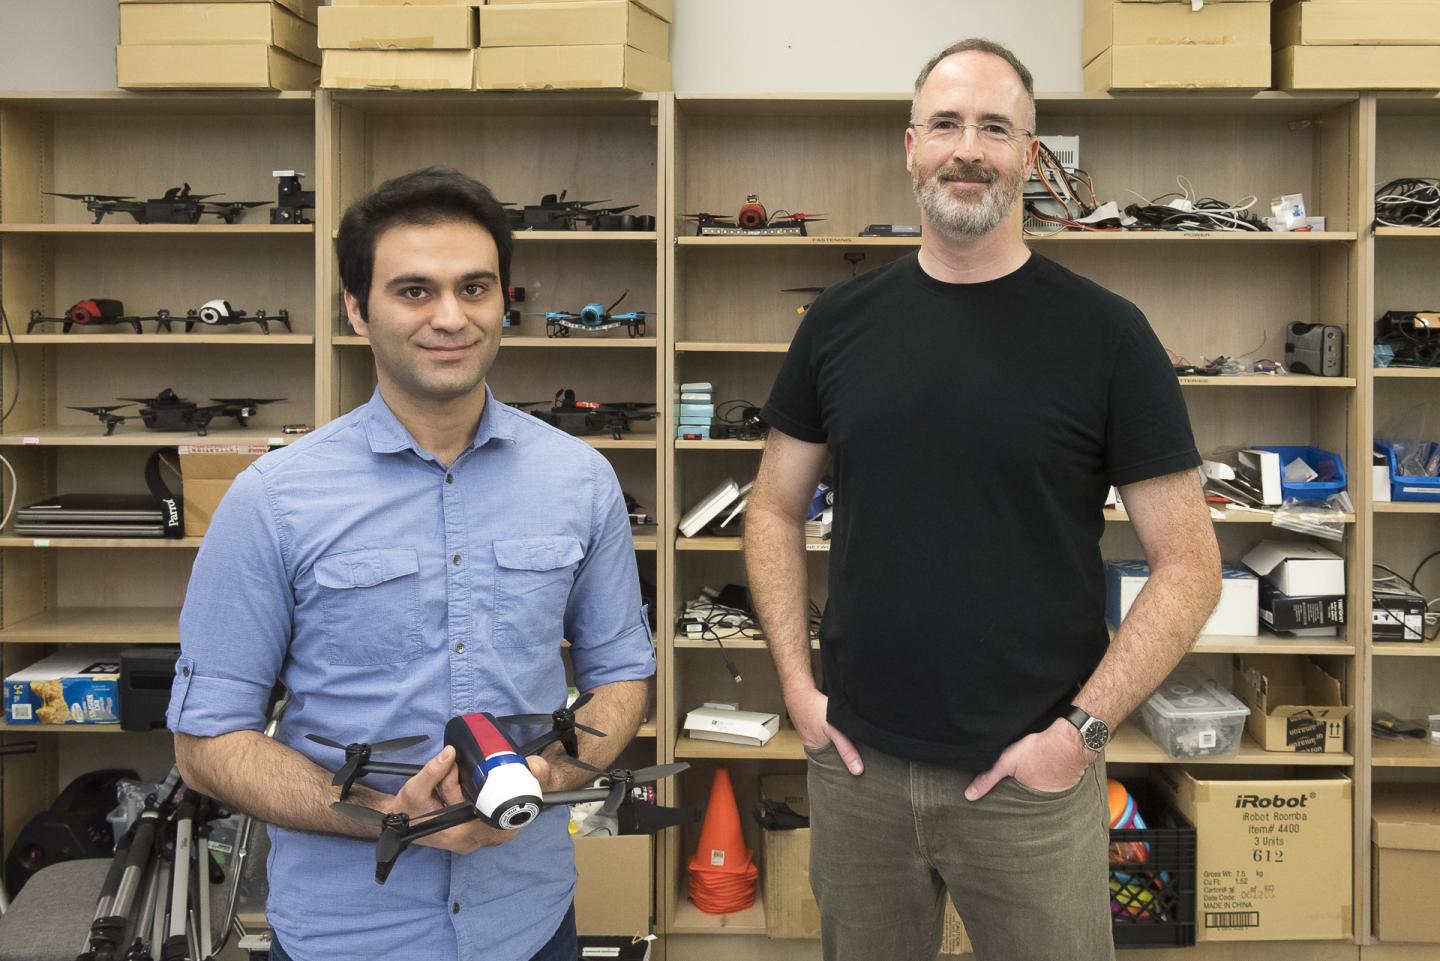 Computing science professor Richard Vaughan (right) and Ph.D. student Sepehr MohaimenianPour (left) are developing technologies in SFU's Autonomy Lab to help users interact with drones in a more intuitive manner.